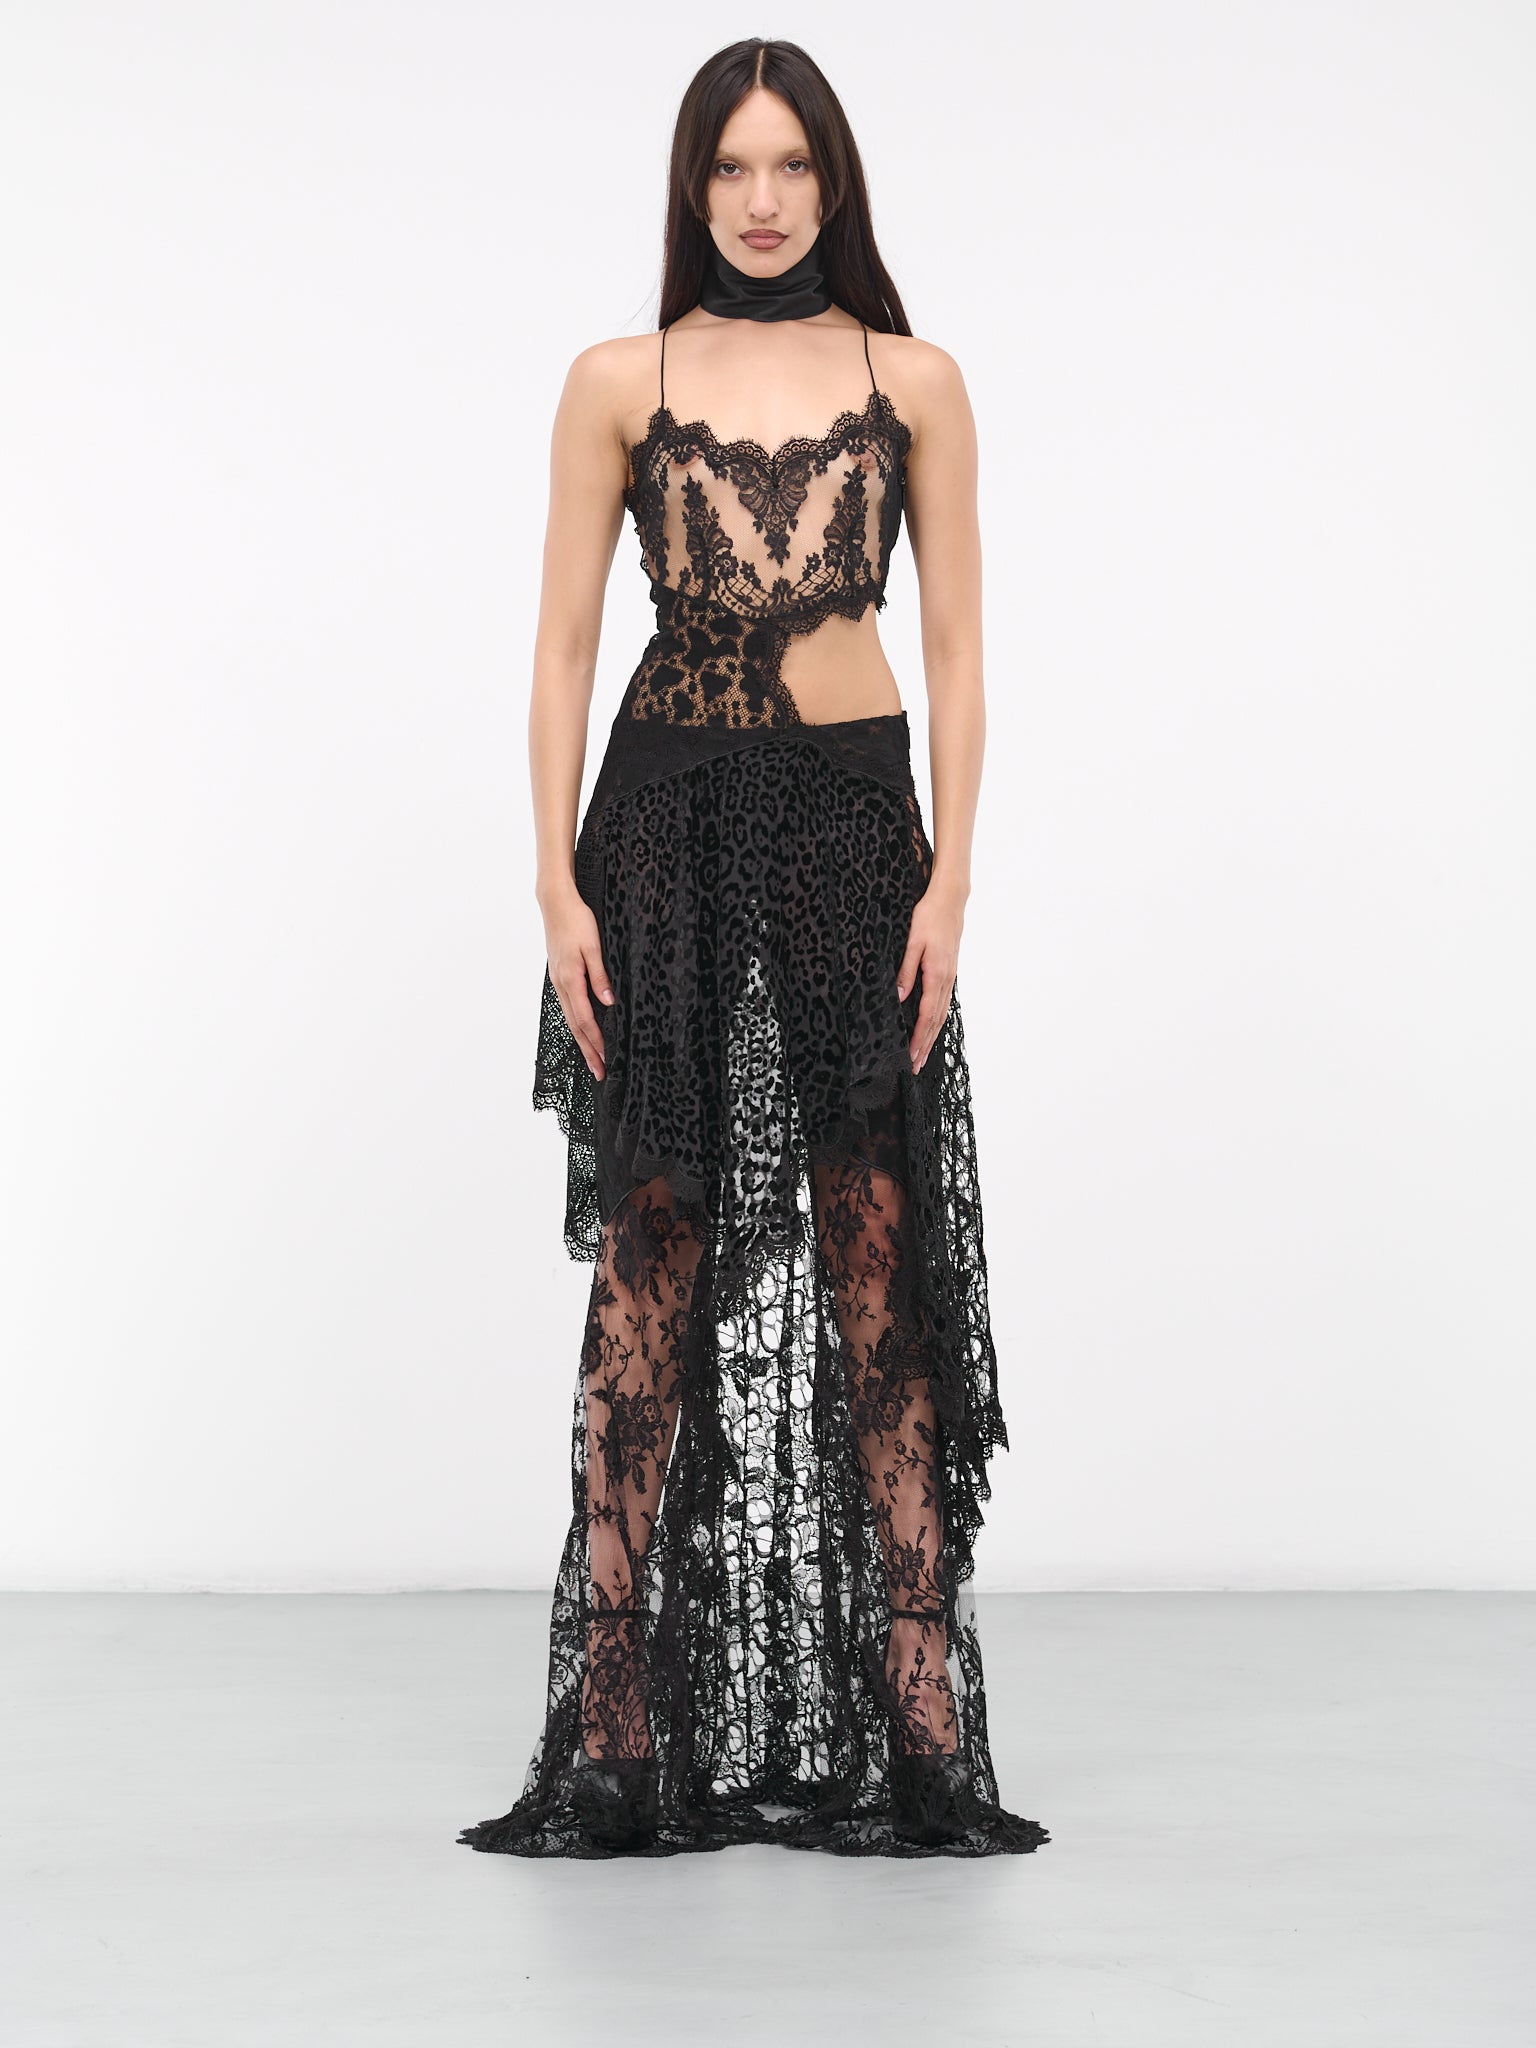 Lace Flared Trousers